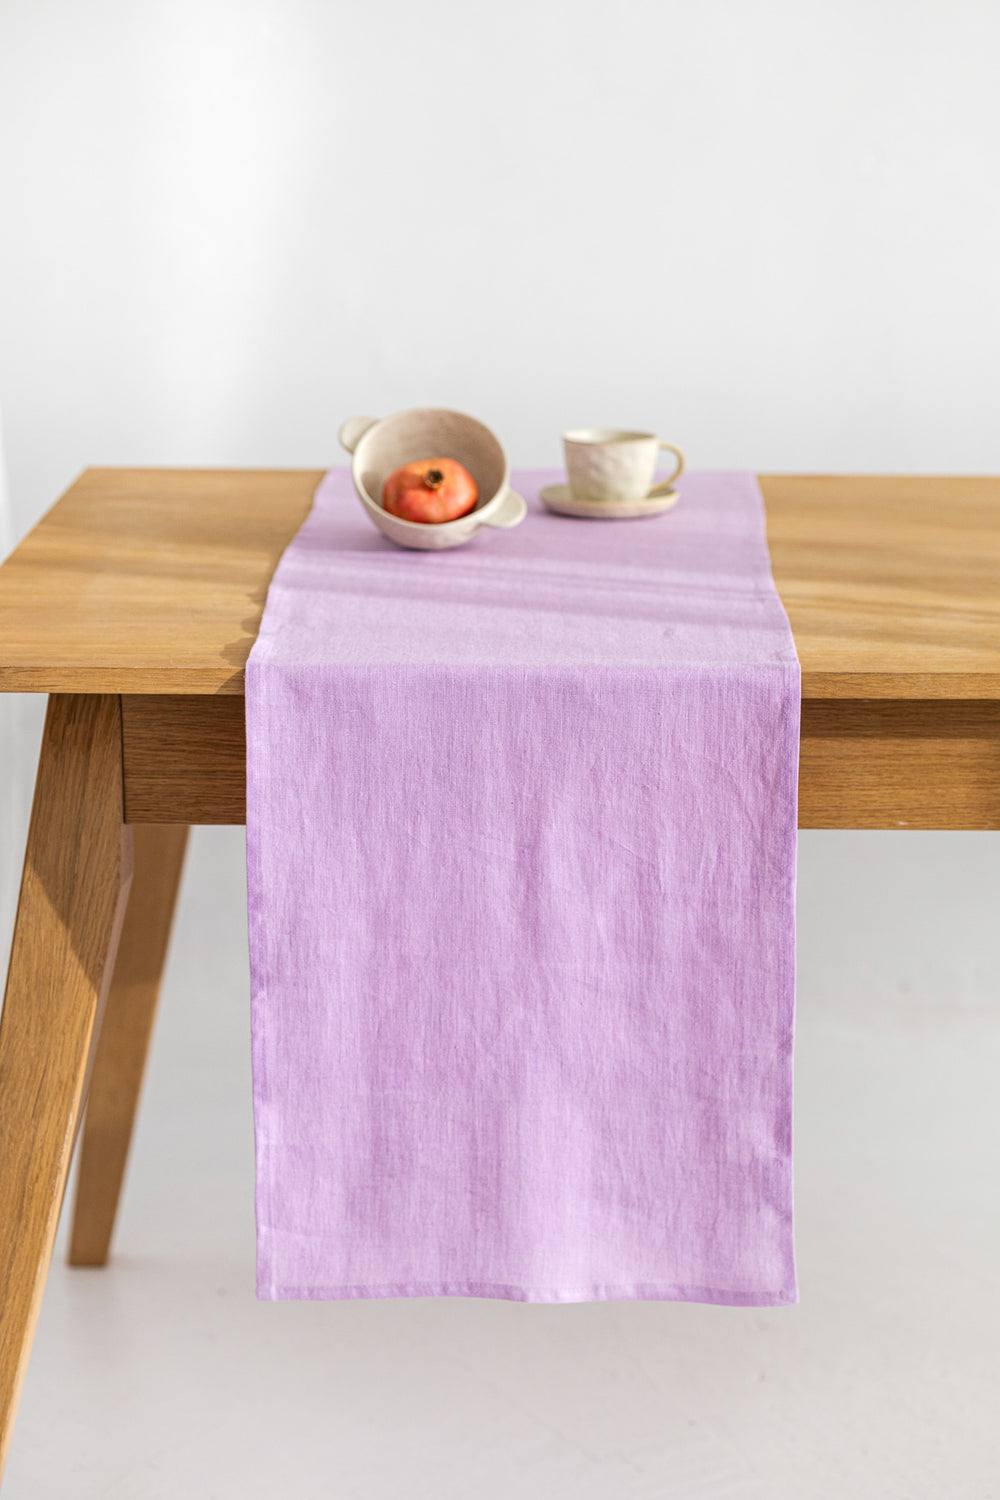 Linen Table Runner On Table In Lavender Color 1 - Daily Linen